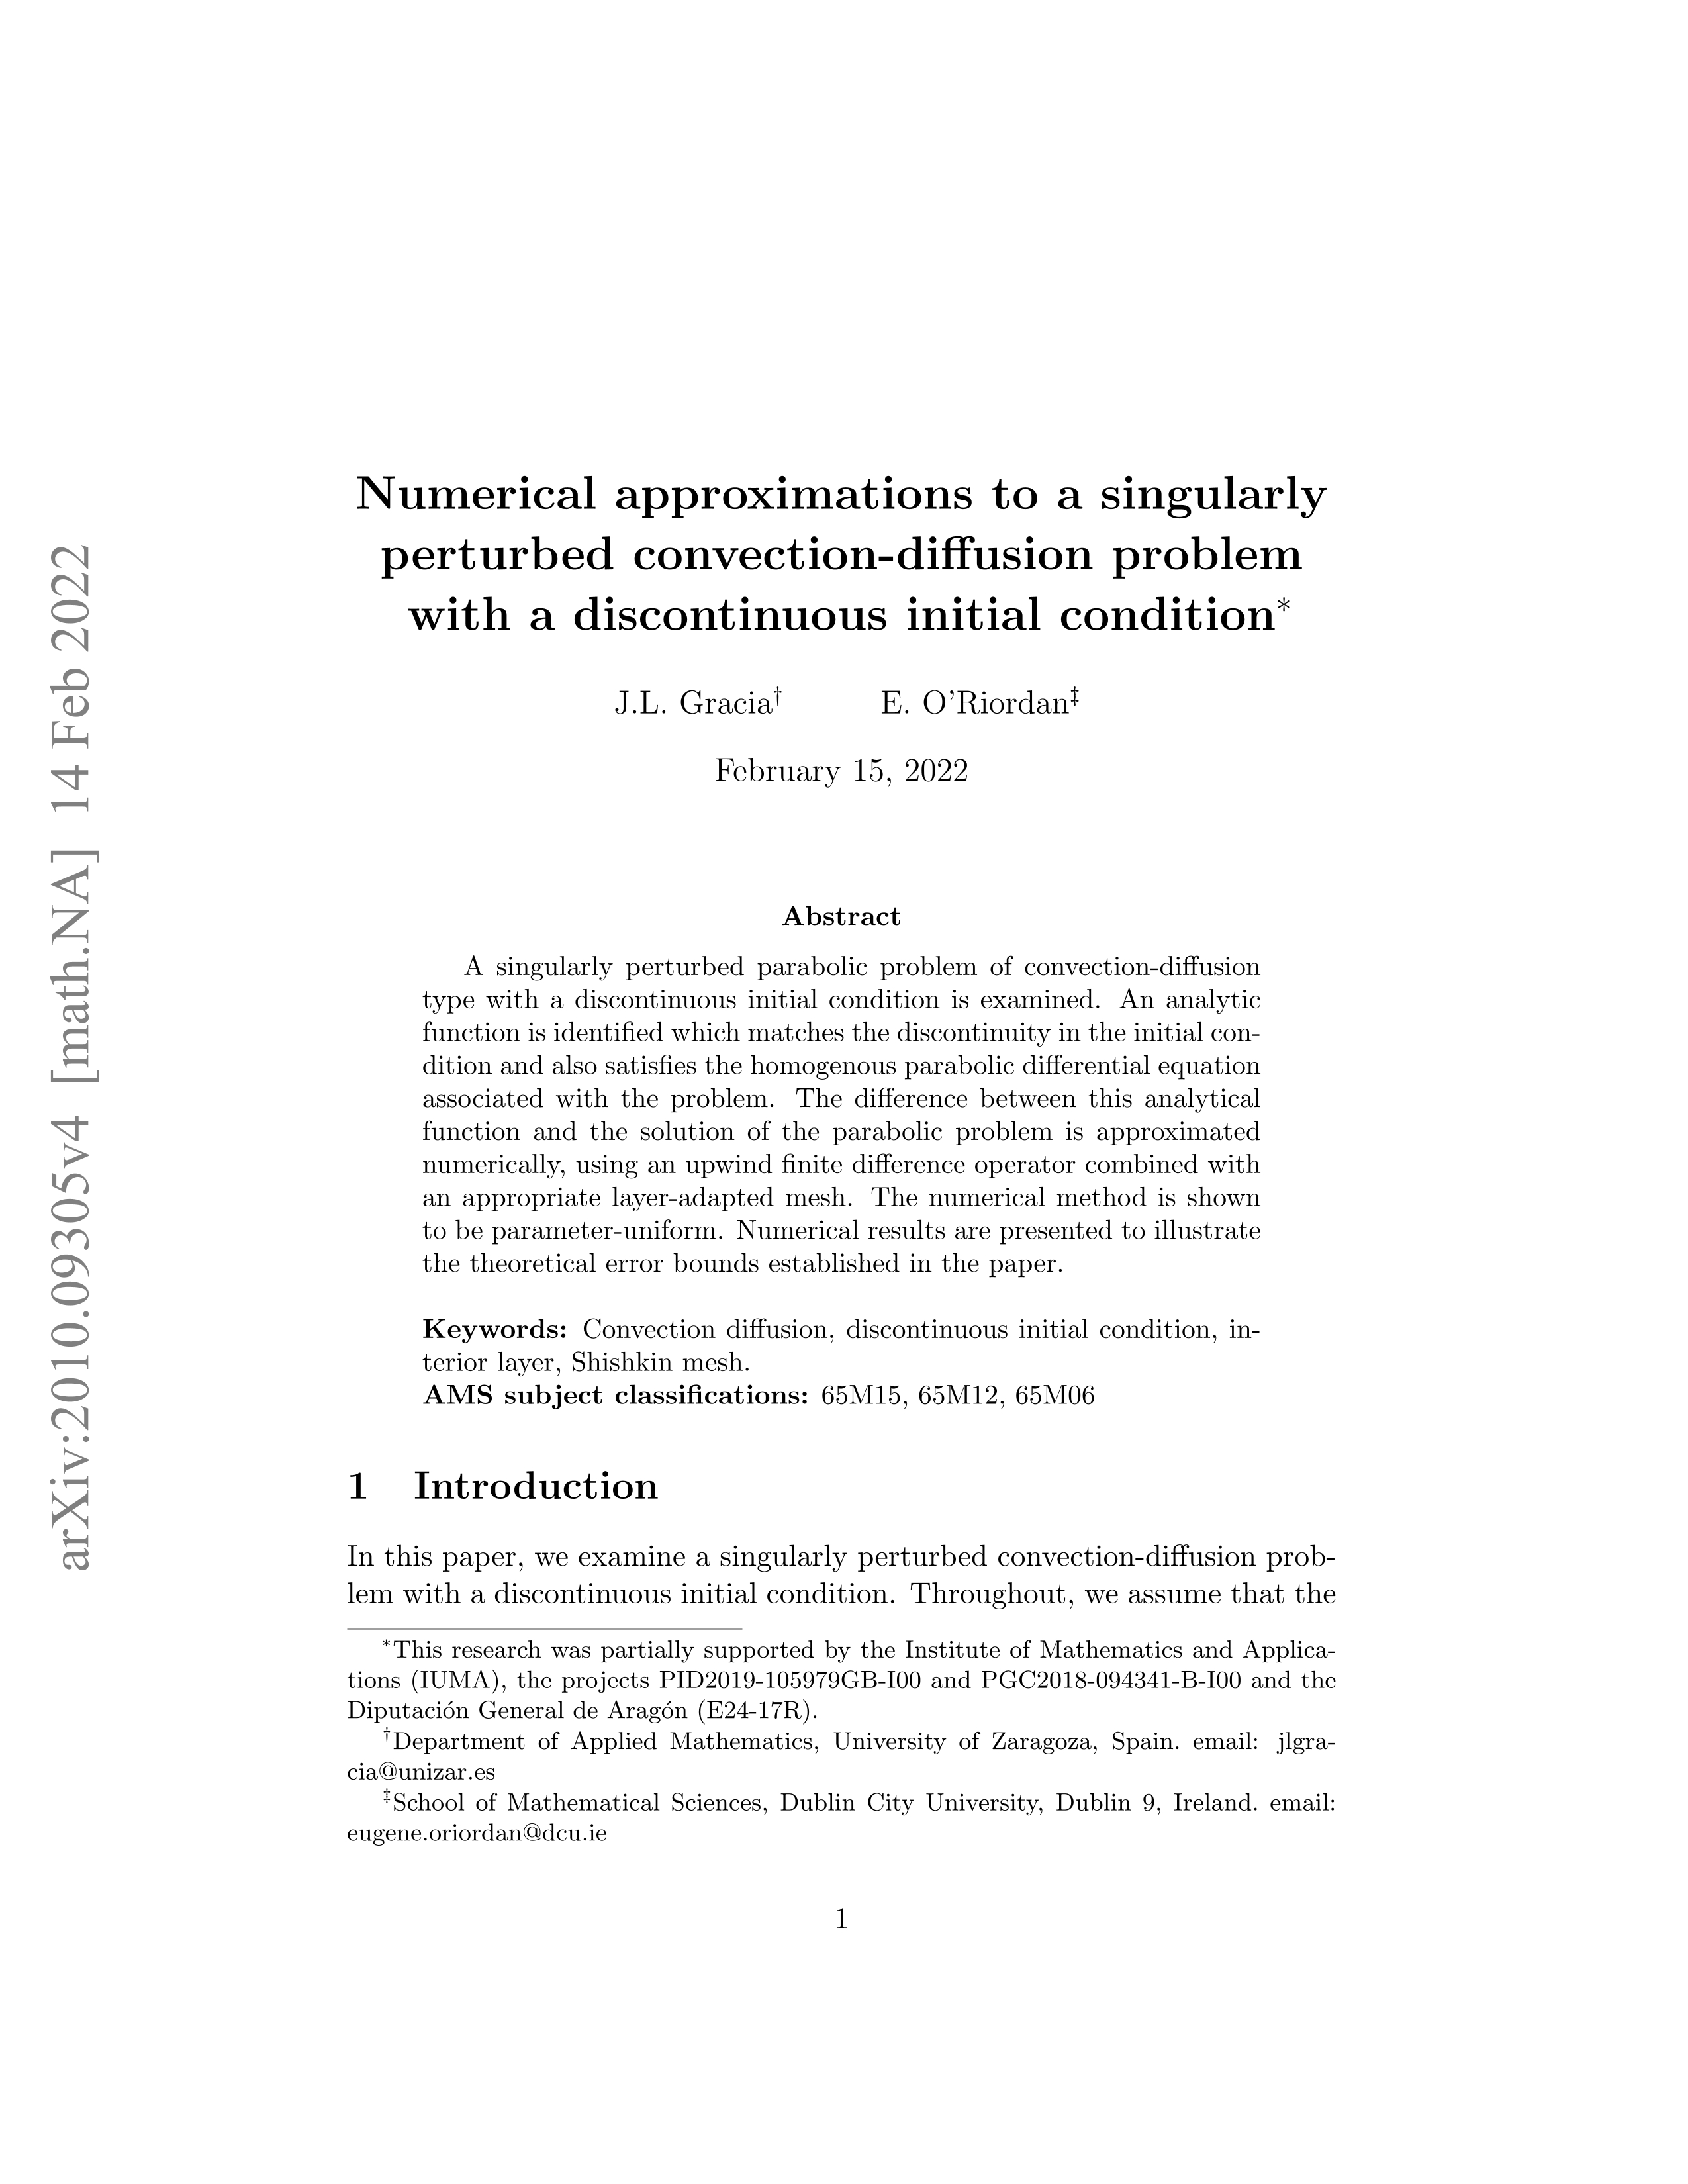 Numerical approximations to a singularly perturbed convection-diffusion problem with a discontinuous initial condition